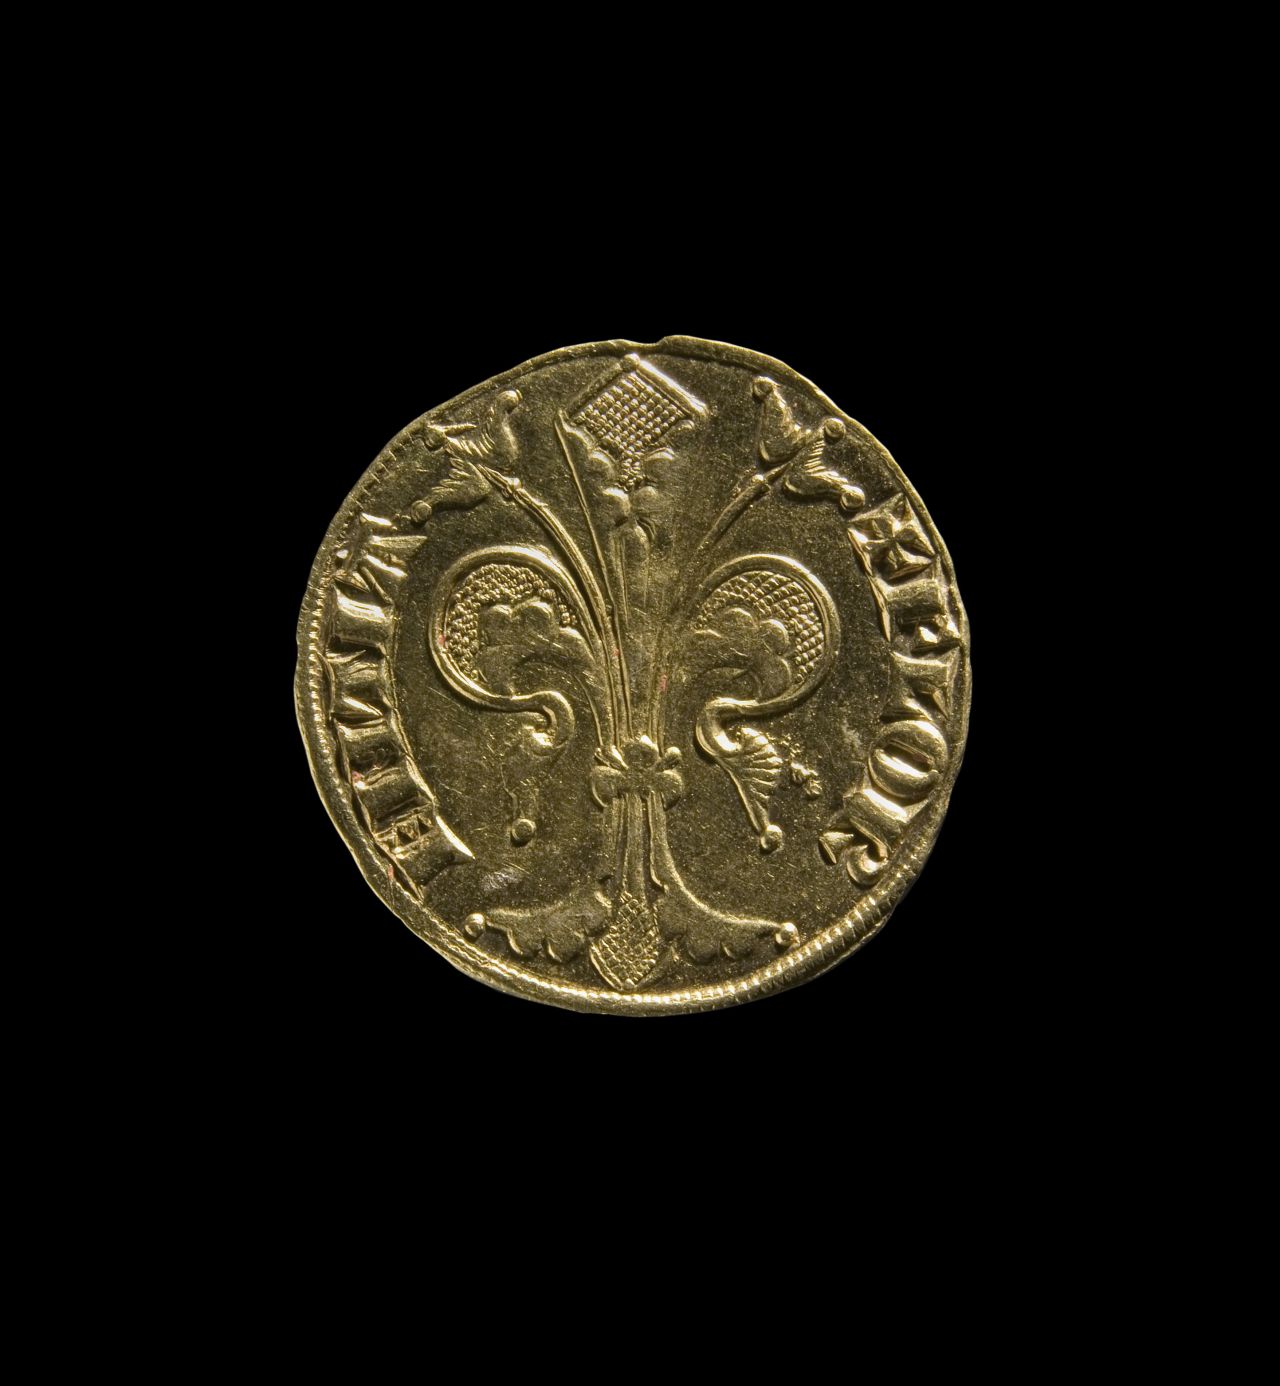 A gold florin from Florence, 1252-1303. The Florin was a gold coin that was used as a stable currency all over Europe.